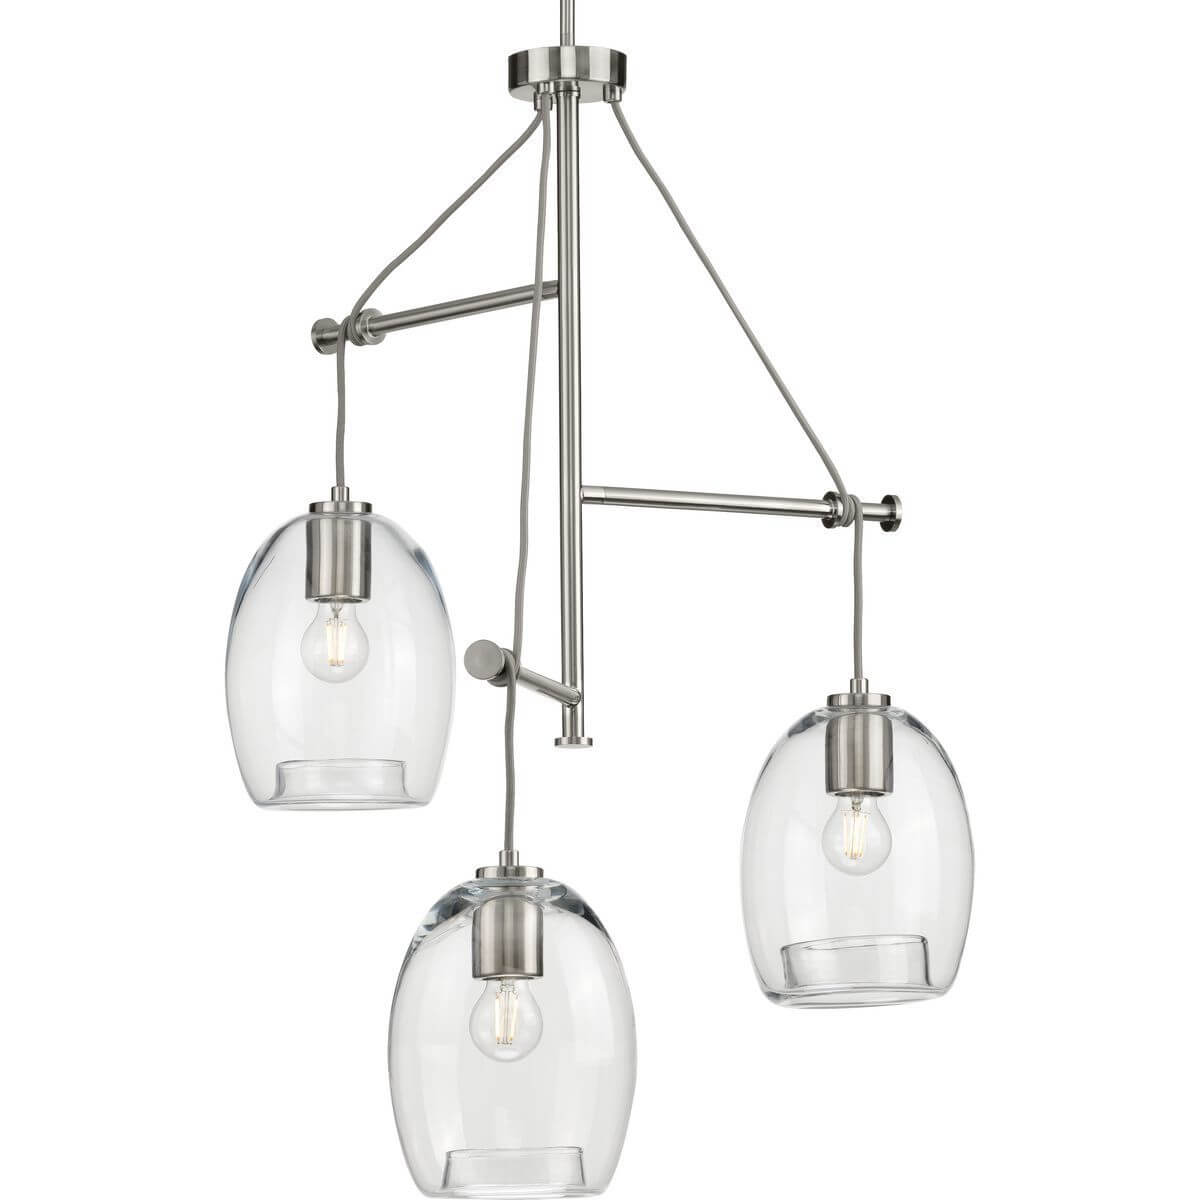 Progress Lighting Caisson 3 Light 30 inch Pendant in Brushed Nickel with Clear Glass P500160-009